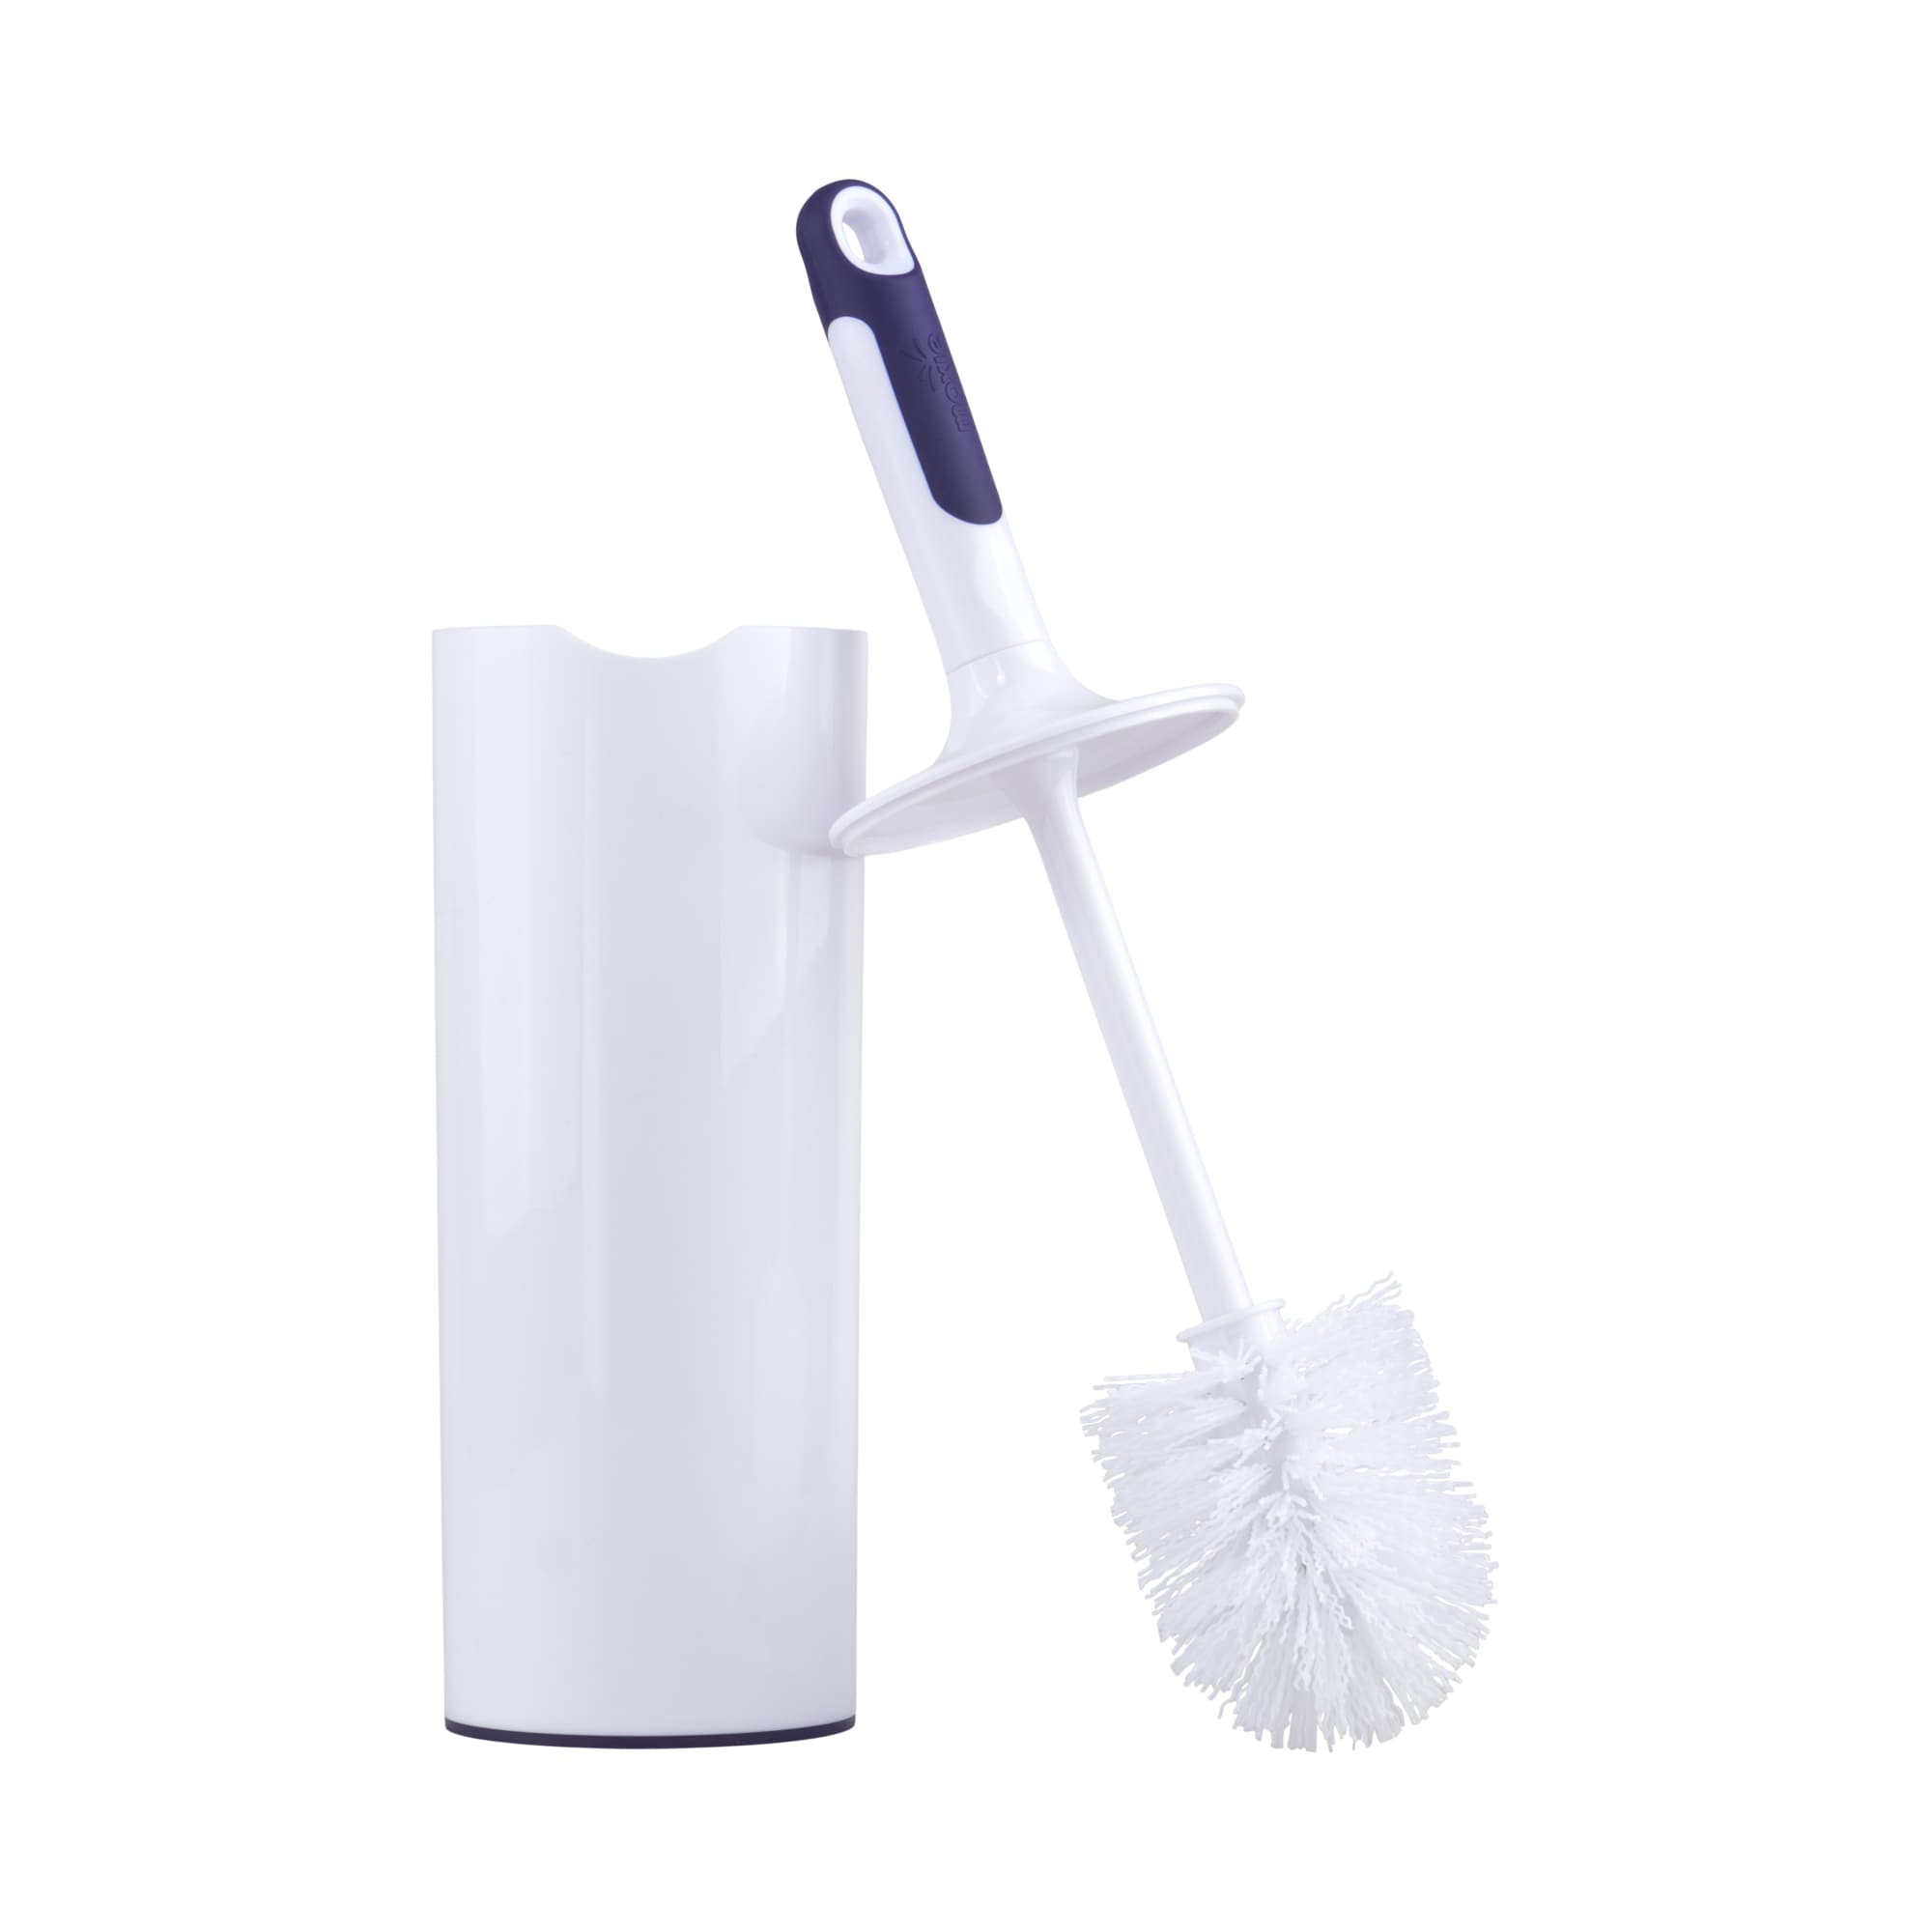 Hard-Bristled Crevice Cleaning Brush,Crevice Gap Cleaning Brush Tool,  Hand-Held Groove Cleaning Brush for Window Rails, Bathroom, Kitchen (Color  : White, Size : 3pcs) 